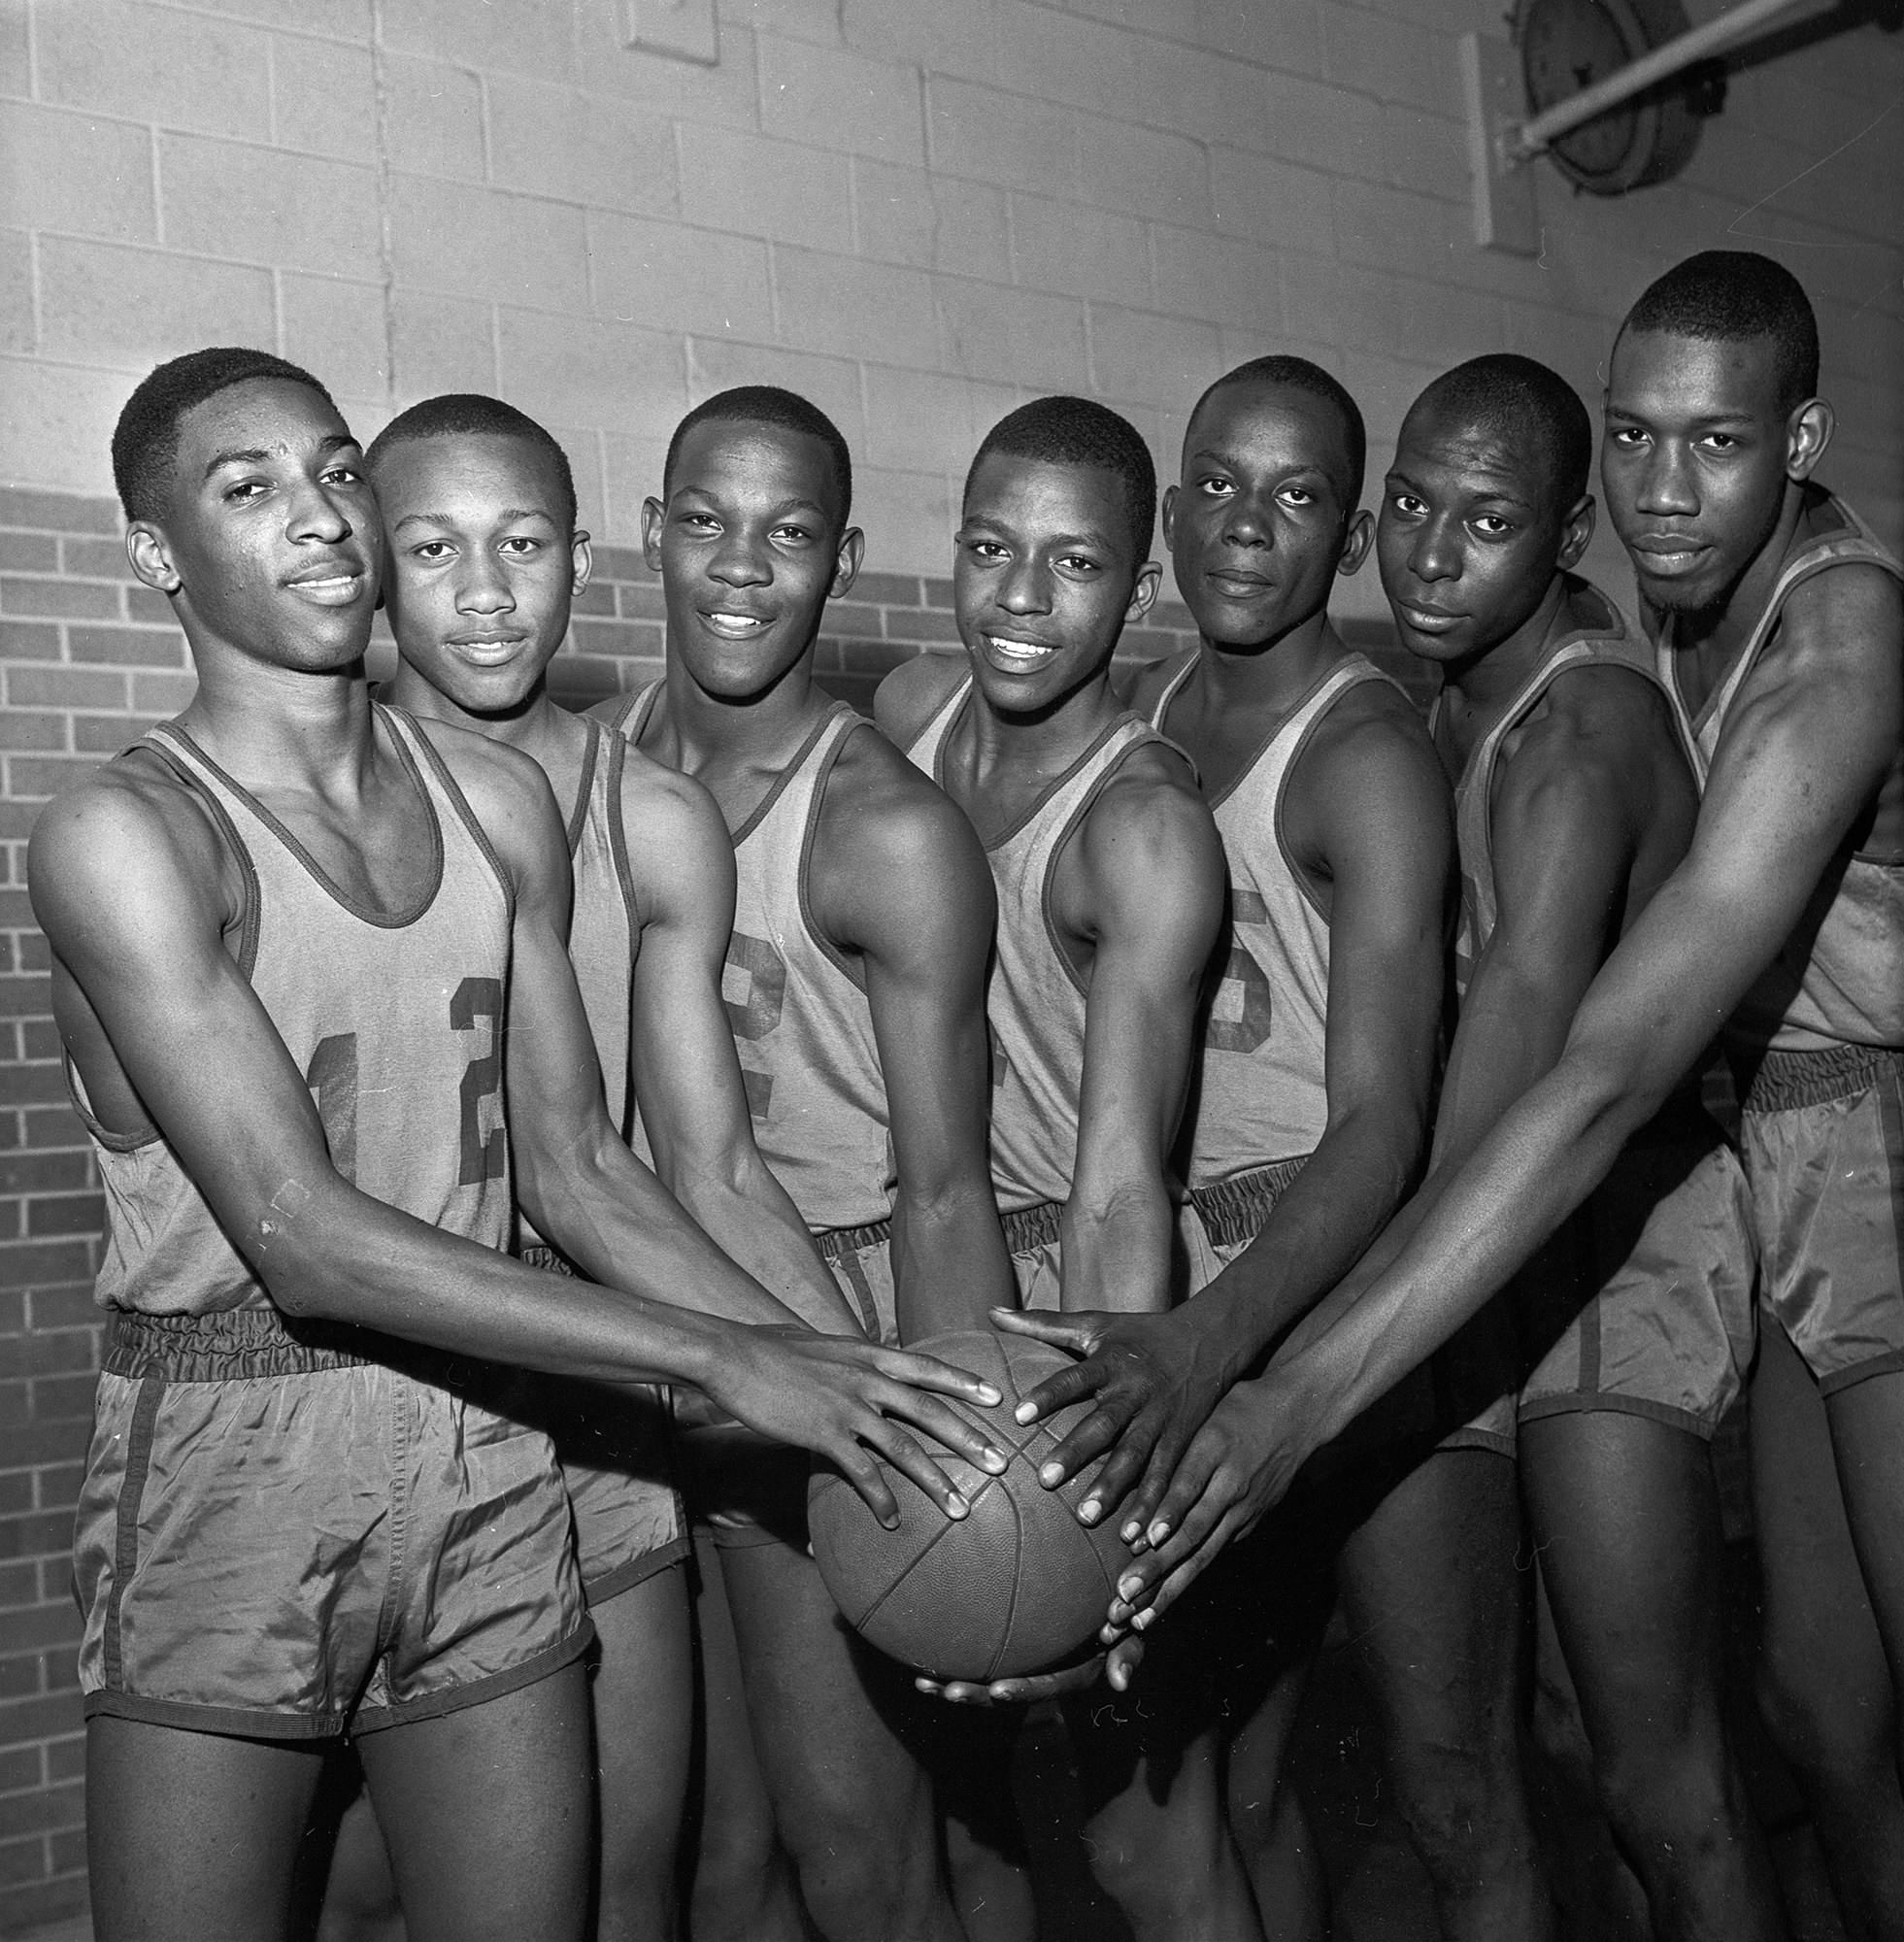 Leading I. M. Terrell to the Class 4A African-American high school basketball championship were, from left to right, Wayne Lewis, Edward Sanders, Sherman Evans, Charles Jefferson, Nathaniel Carroll, Ollie Ledbetter, and James Cash.